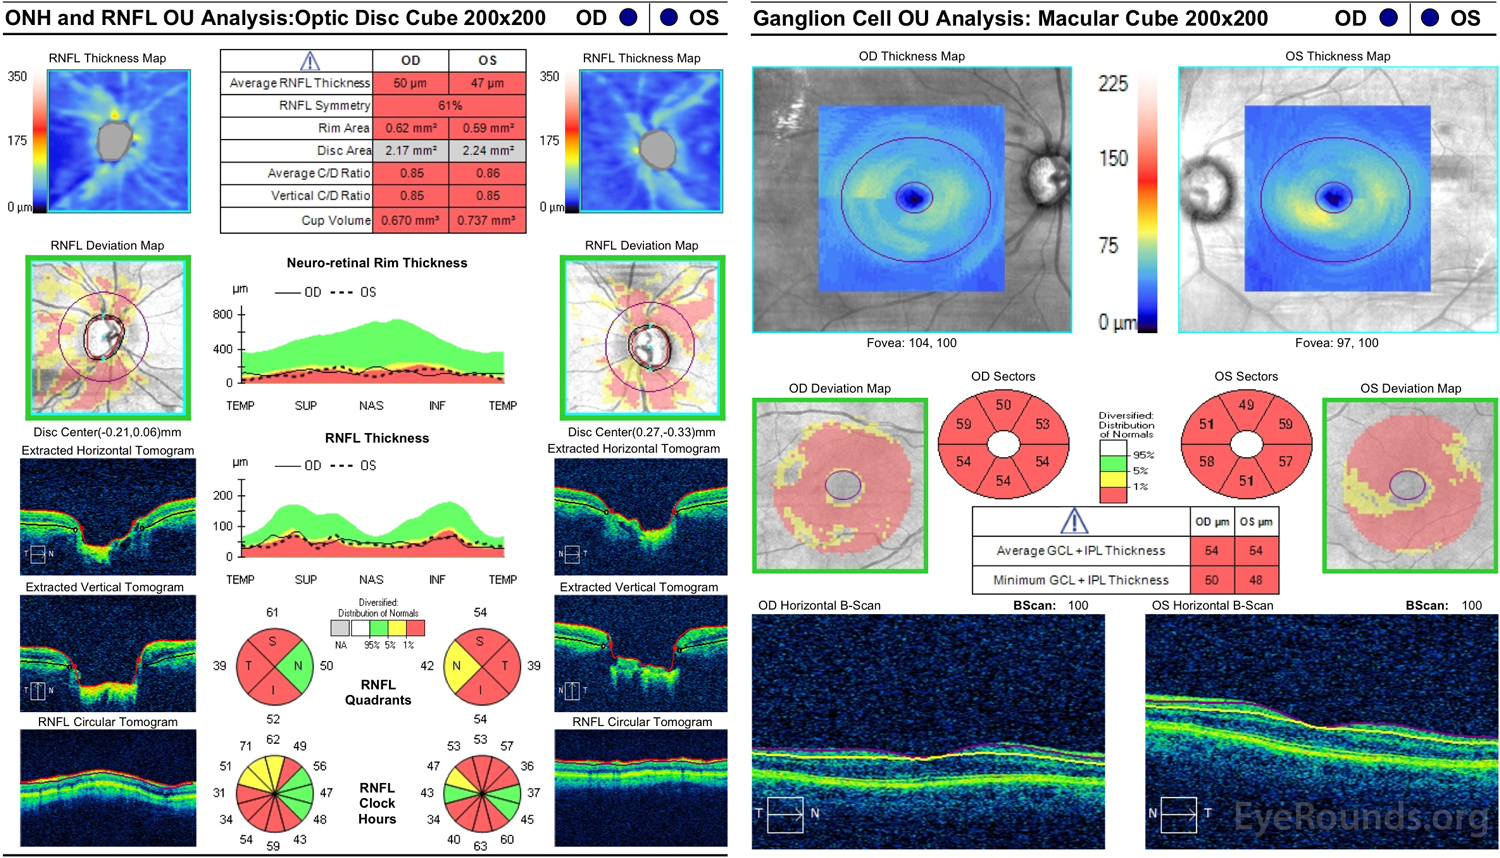 Optical coherence tomography analysis of optic nerve head (ONH), retinal nerve fiber layer (RNFL), and ganglion cell layer fiber layer of both eyes